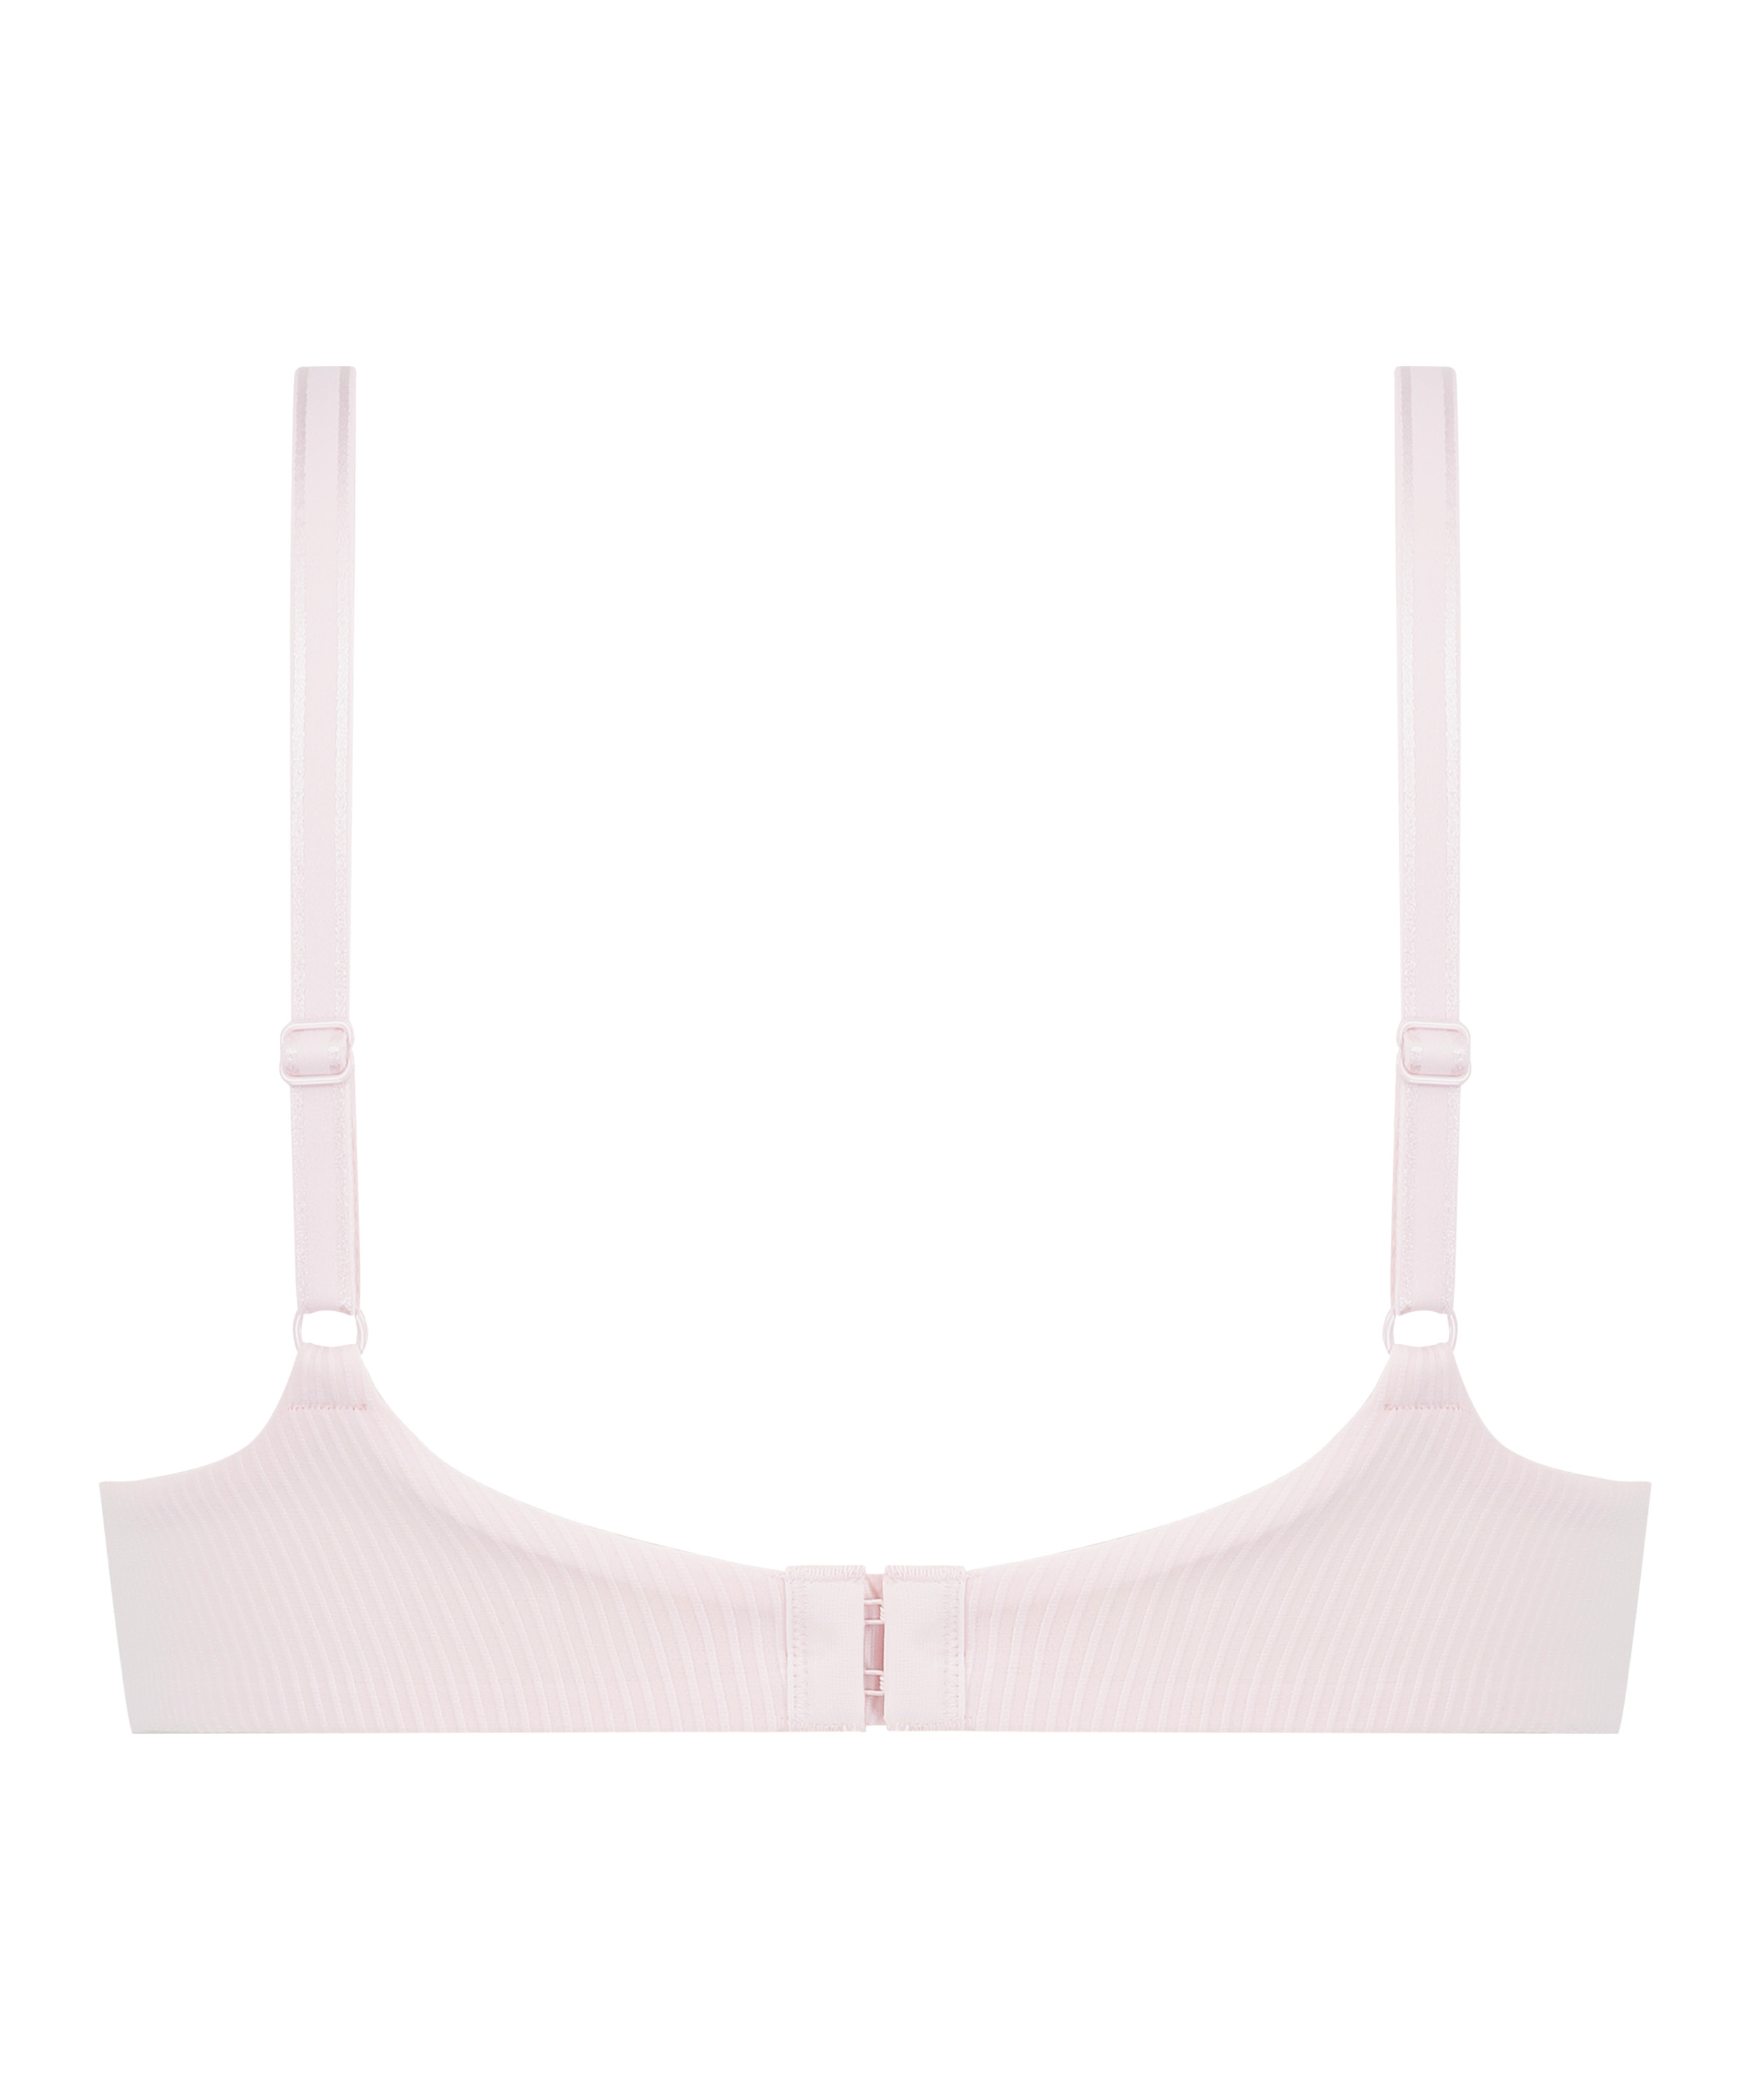 Lola Padded Non-Wired Bra, Pink, main